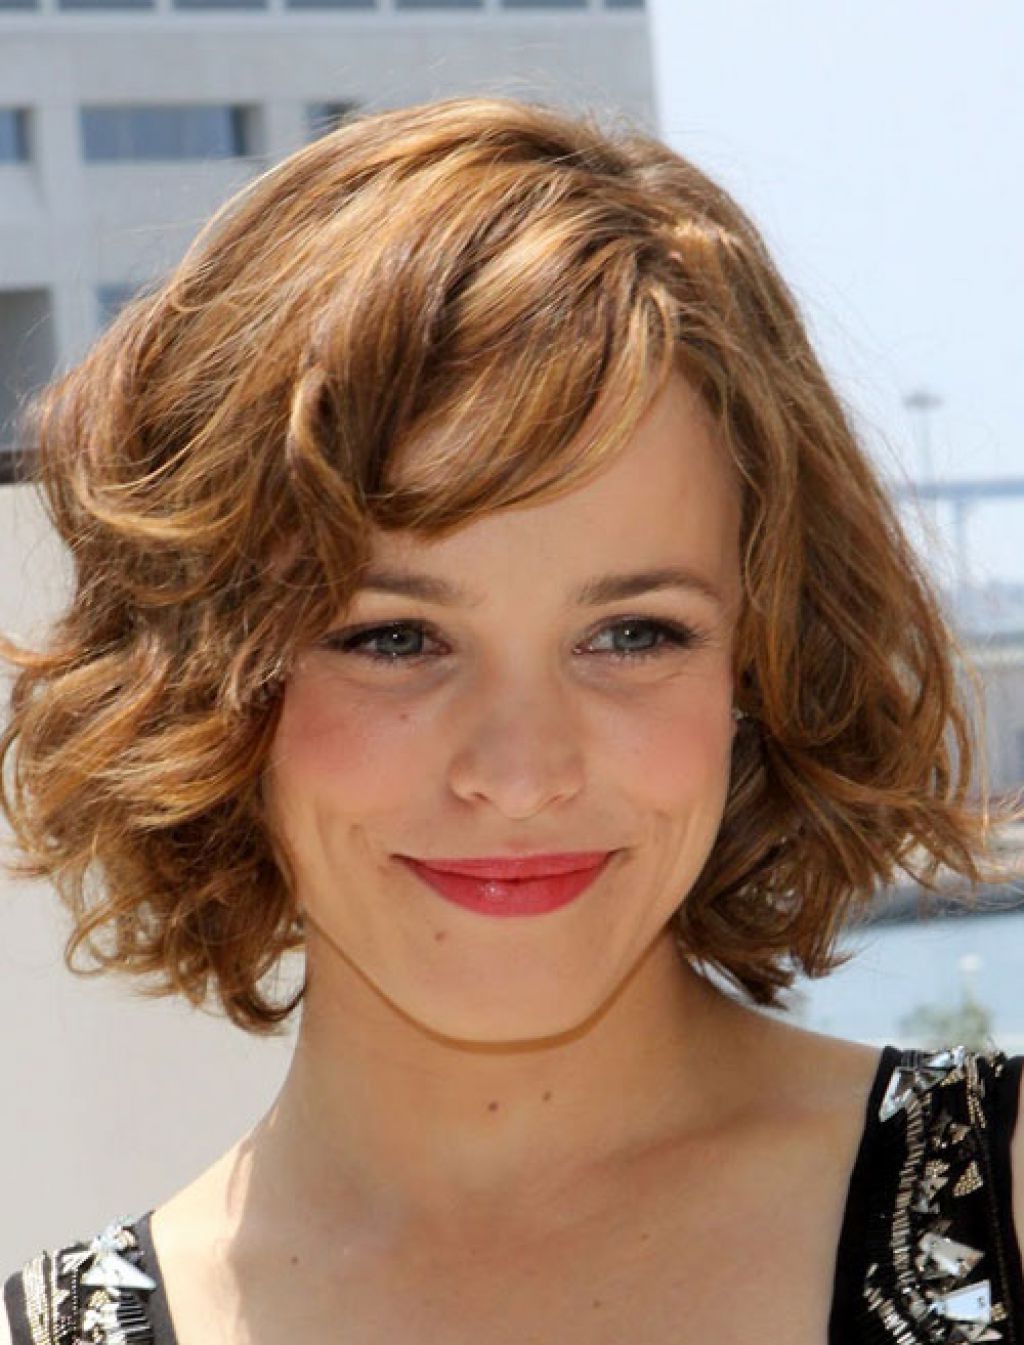 Short Haircuts For Thick Wavy Hair The Best Short Regarding Thick Wavy Short Haircuts (View 17 of 25)